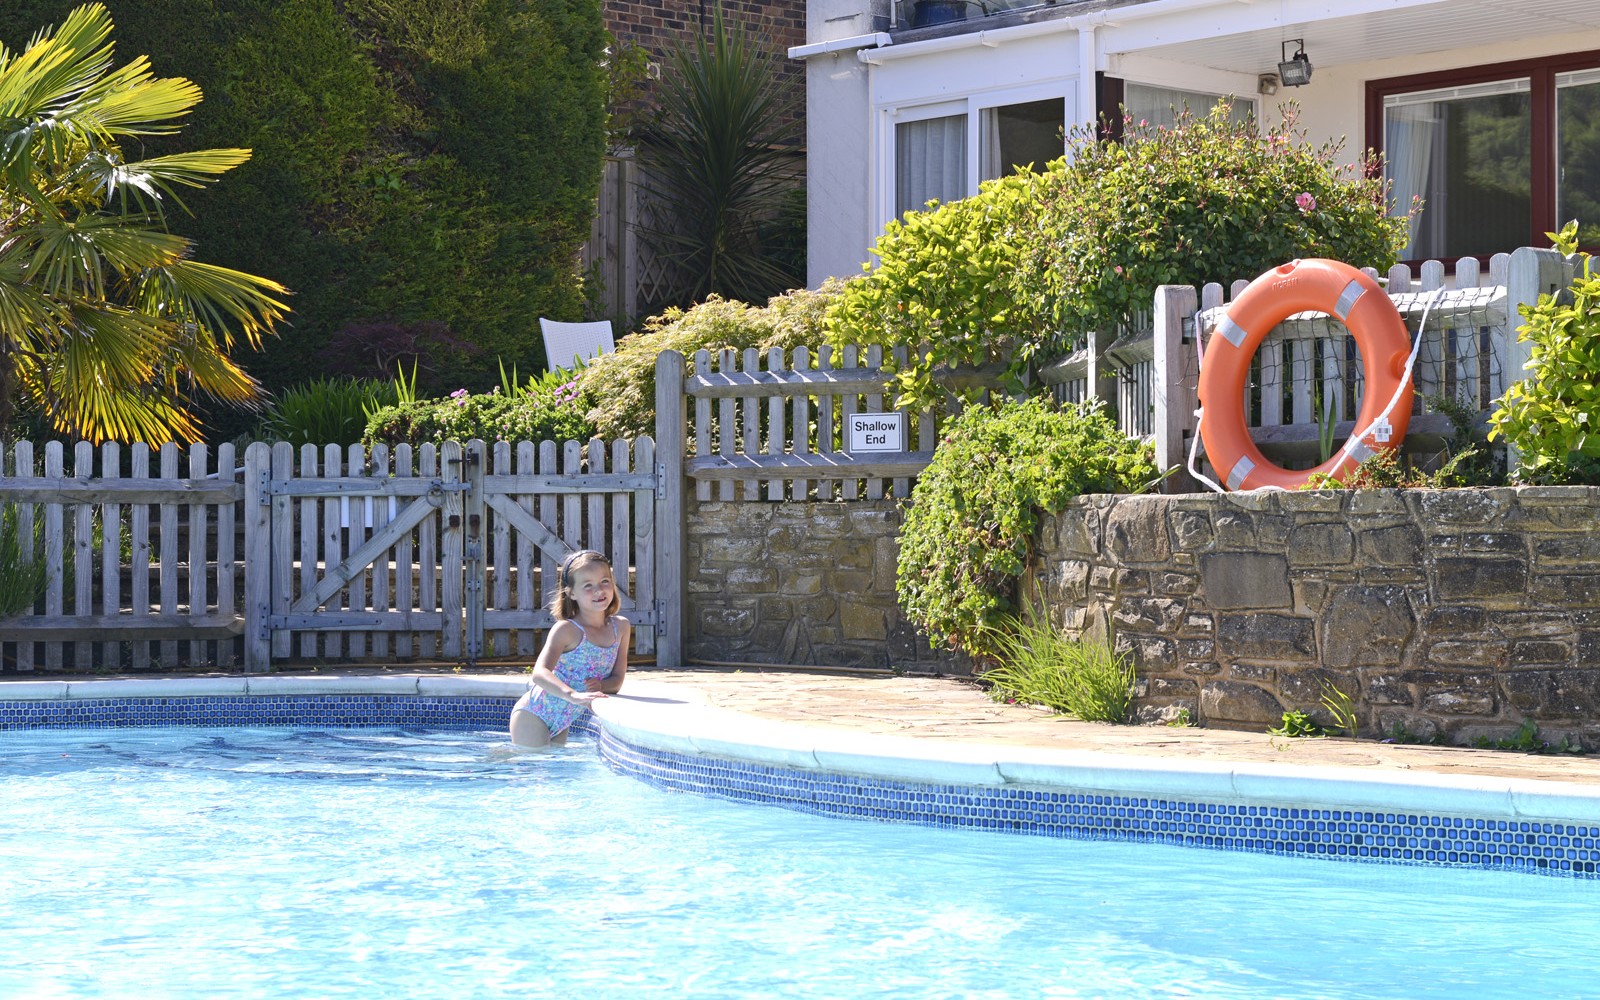 Exclusively Eastbourne - Fairways villa with private pool liday cottages